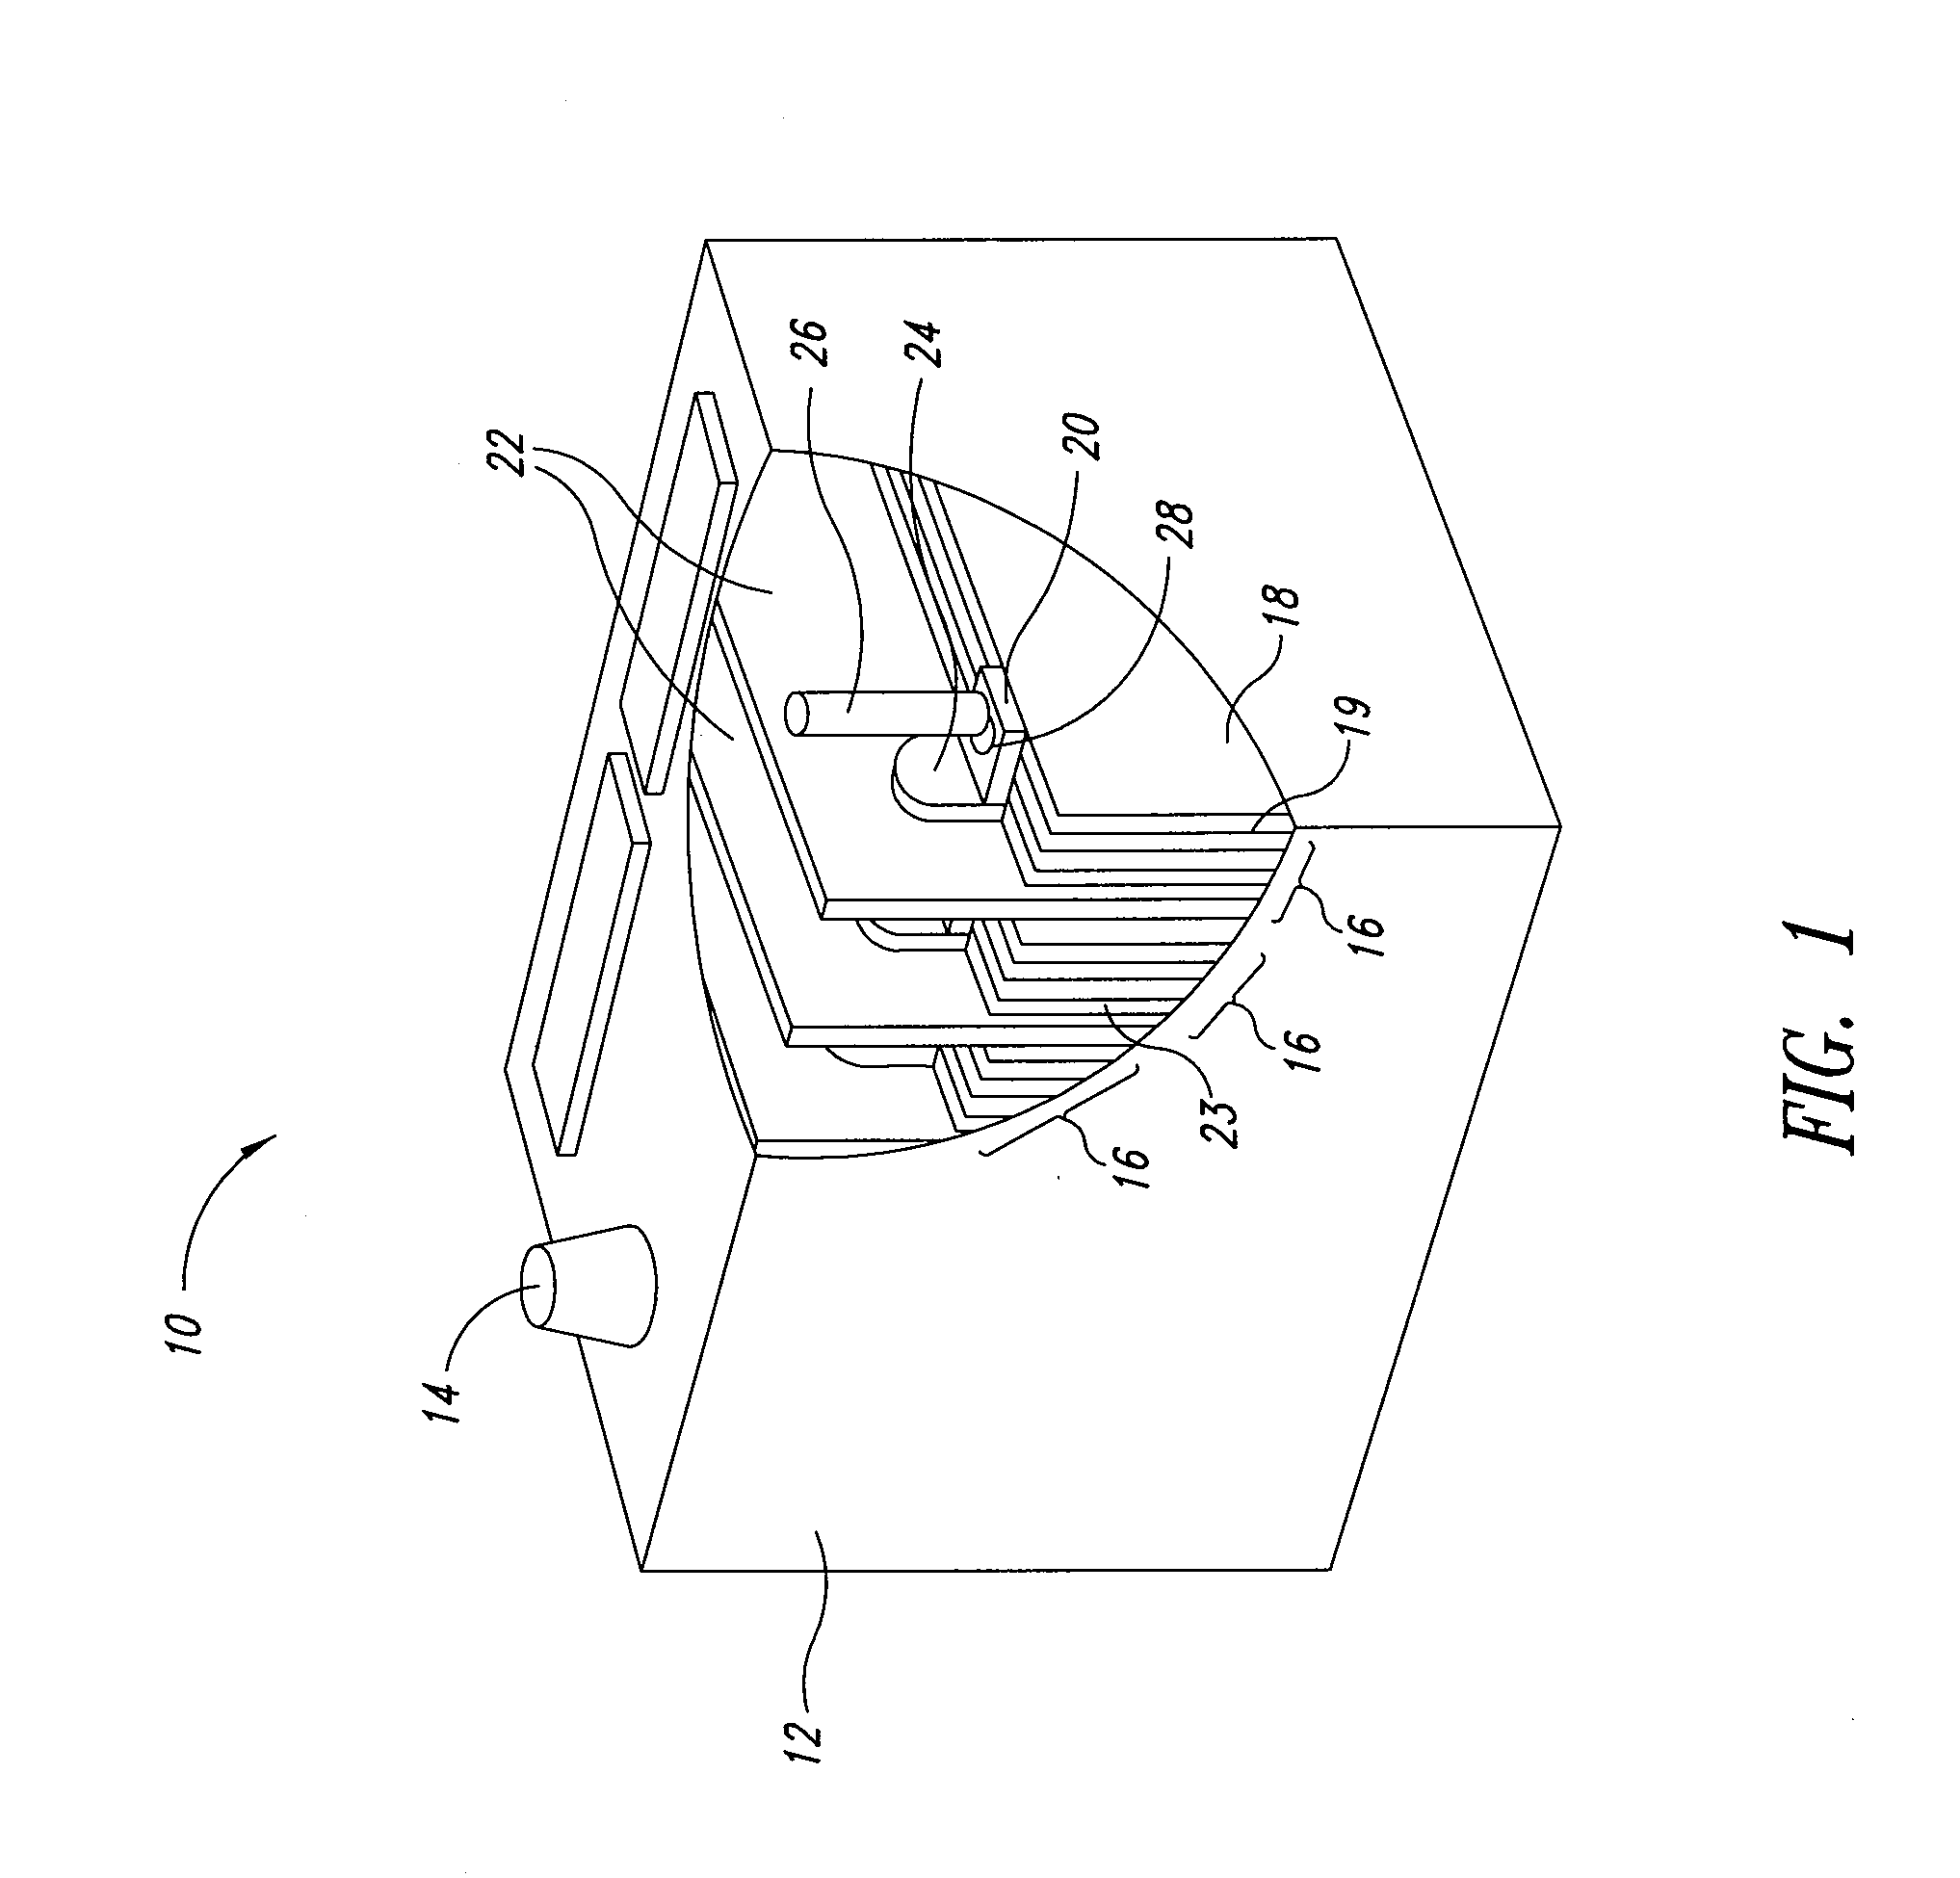 Carbon materials comprising an electrochemical modifier